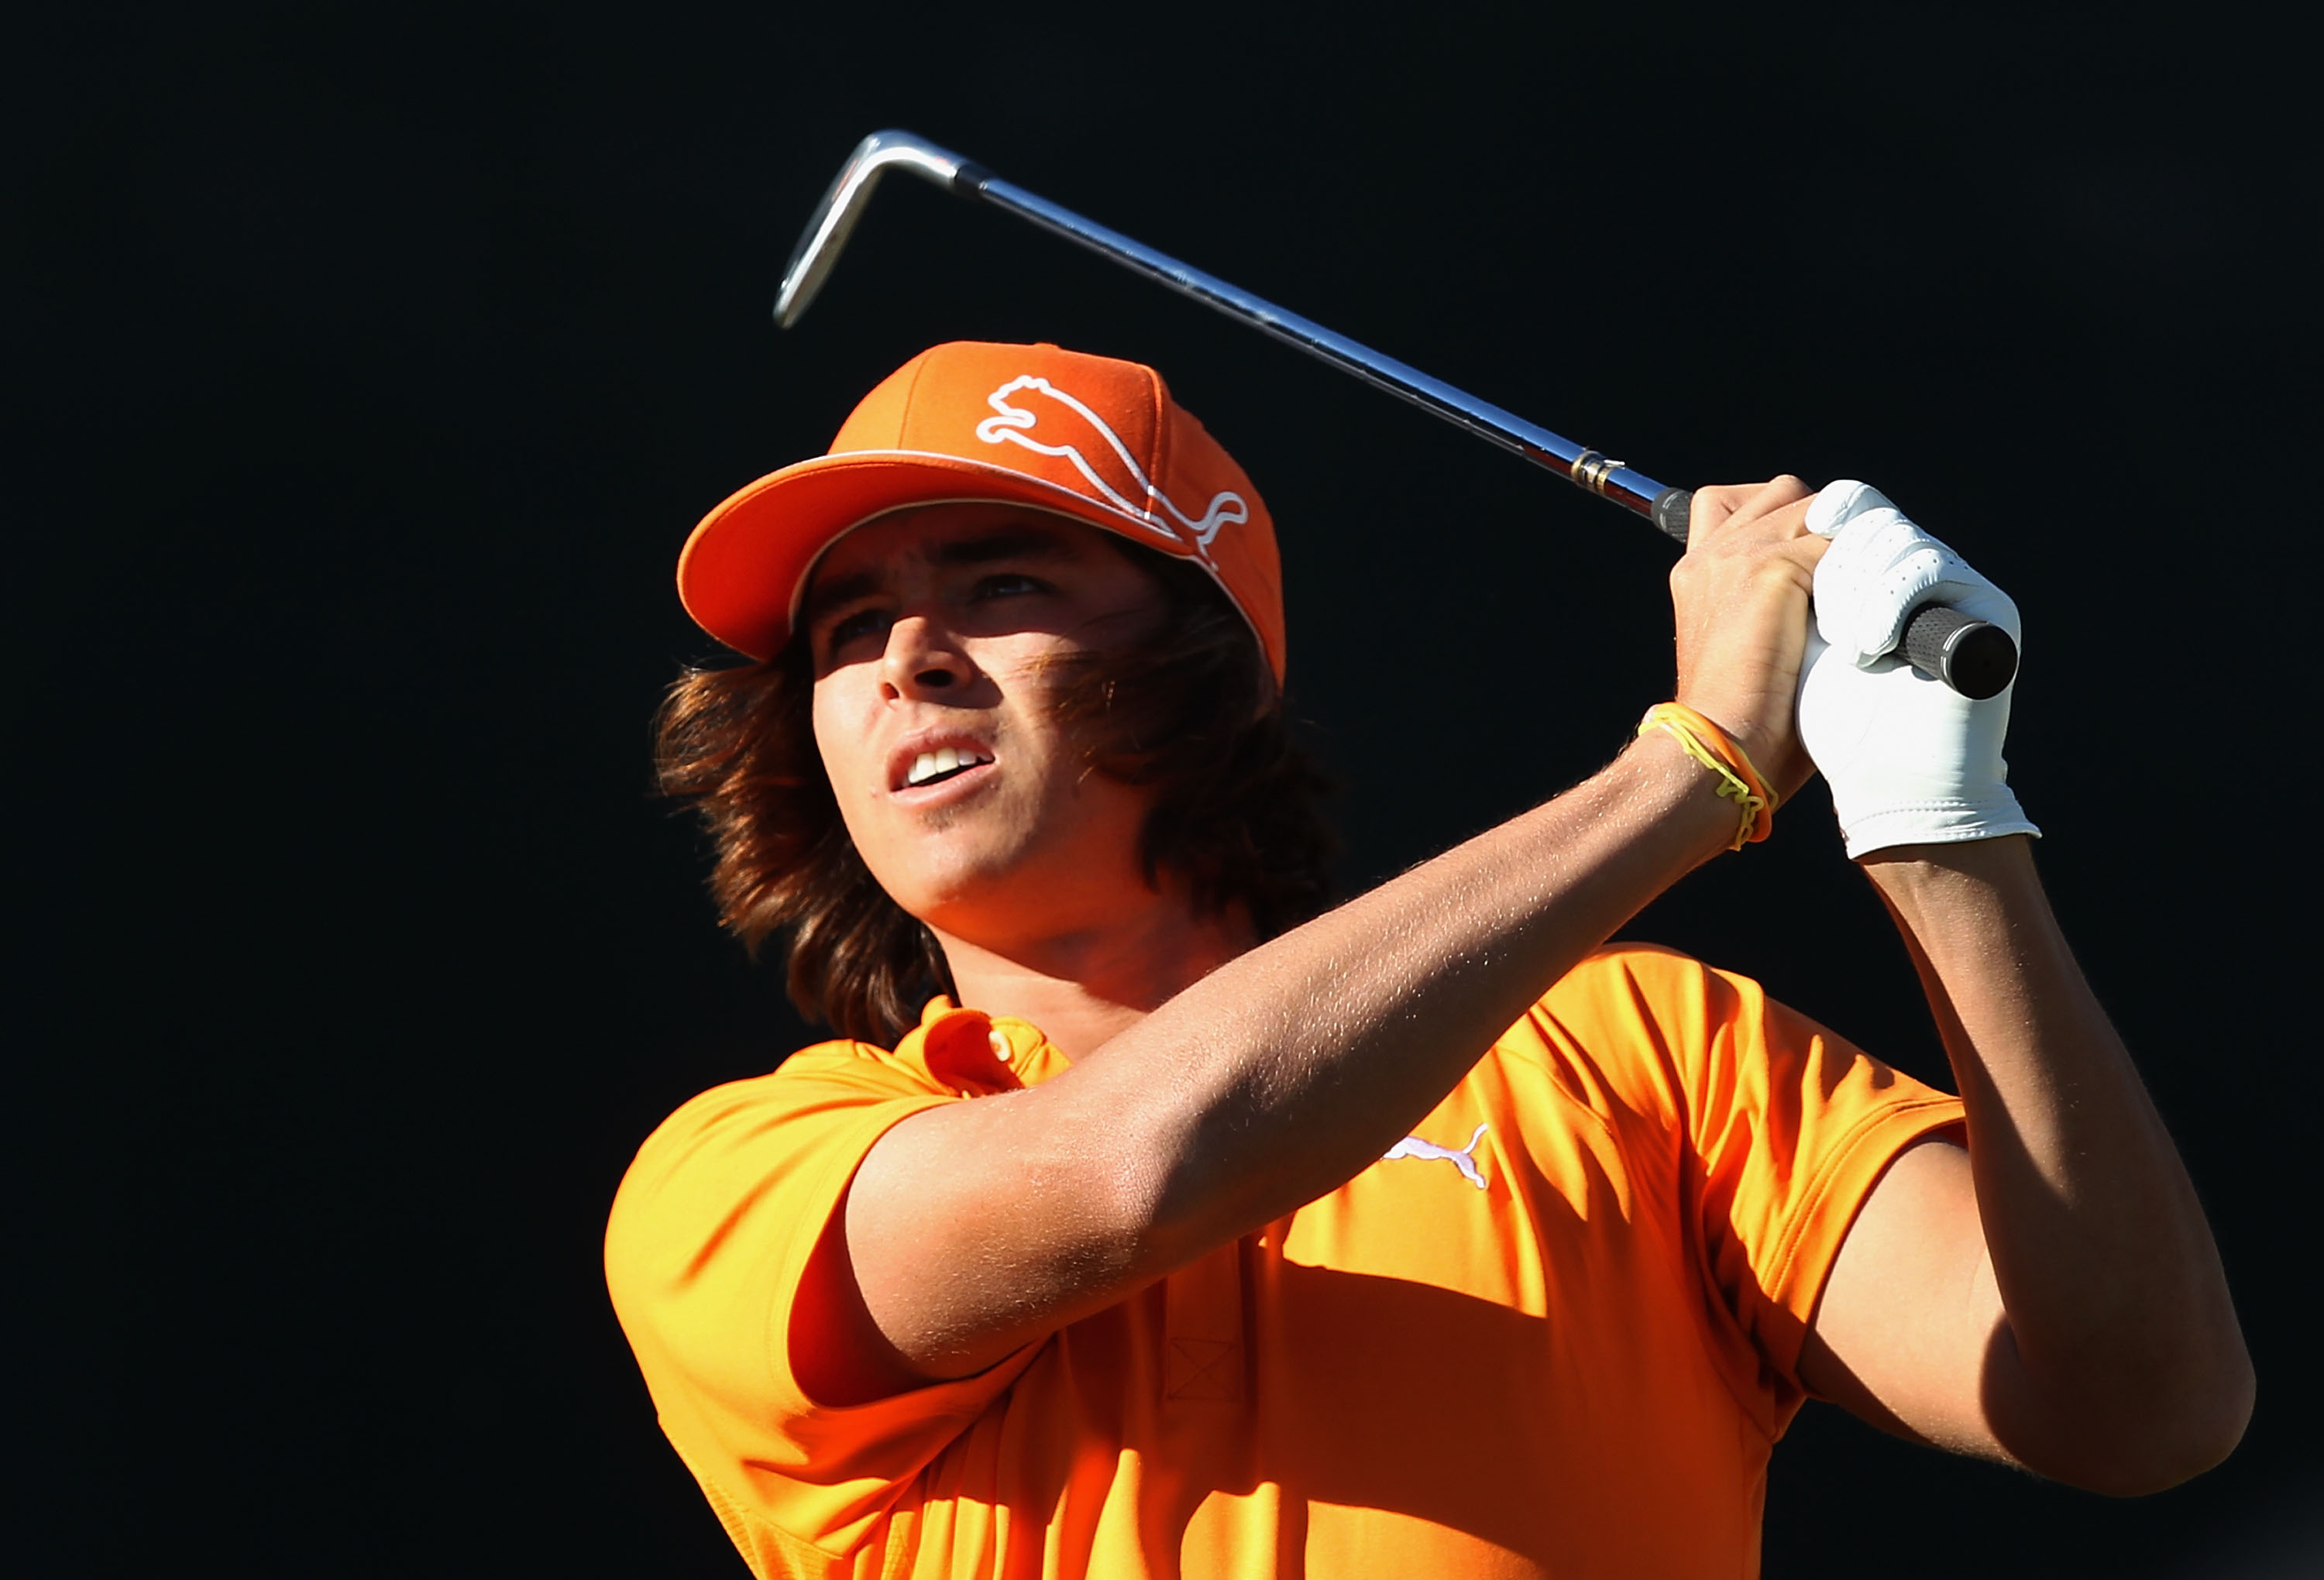 SCOTTSDALE, AZ - FEBRUARY 07:  Rickie Fowler hits a tee shot on the 16th hole during the final round of the Waste Management Phoenix Open at TPC Scottsdale on February 7, 2011 in Scottsdale, Arizona.  (Photo by Christian Petersen/Getty Images)